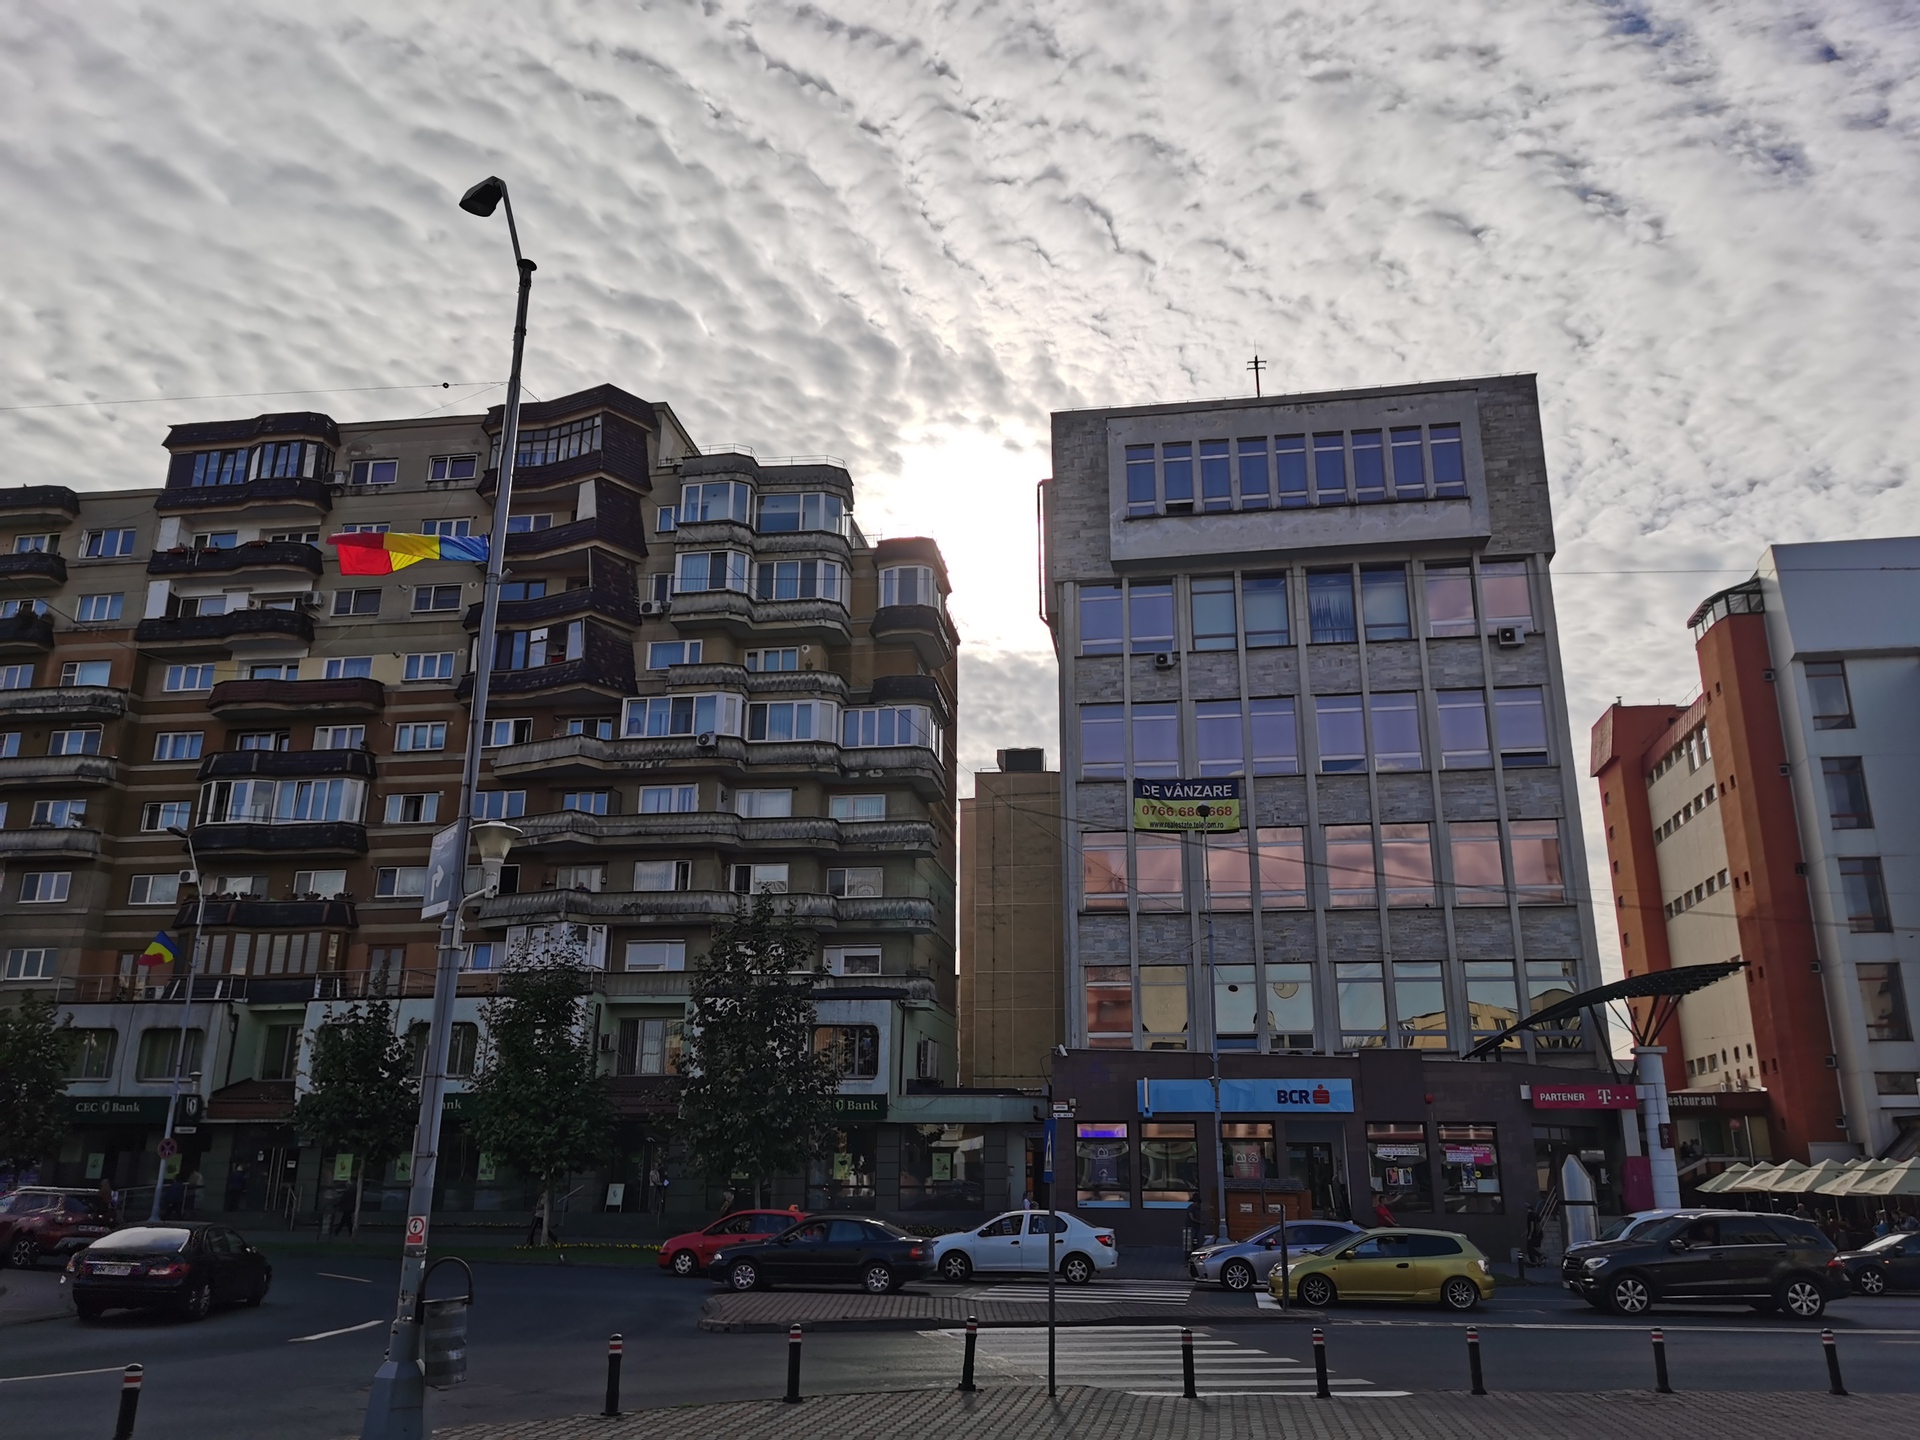 Huawei Mate 30 Pro Camera test HDR shot of tall buildings in city